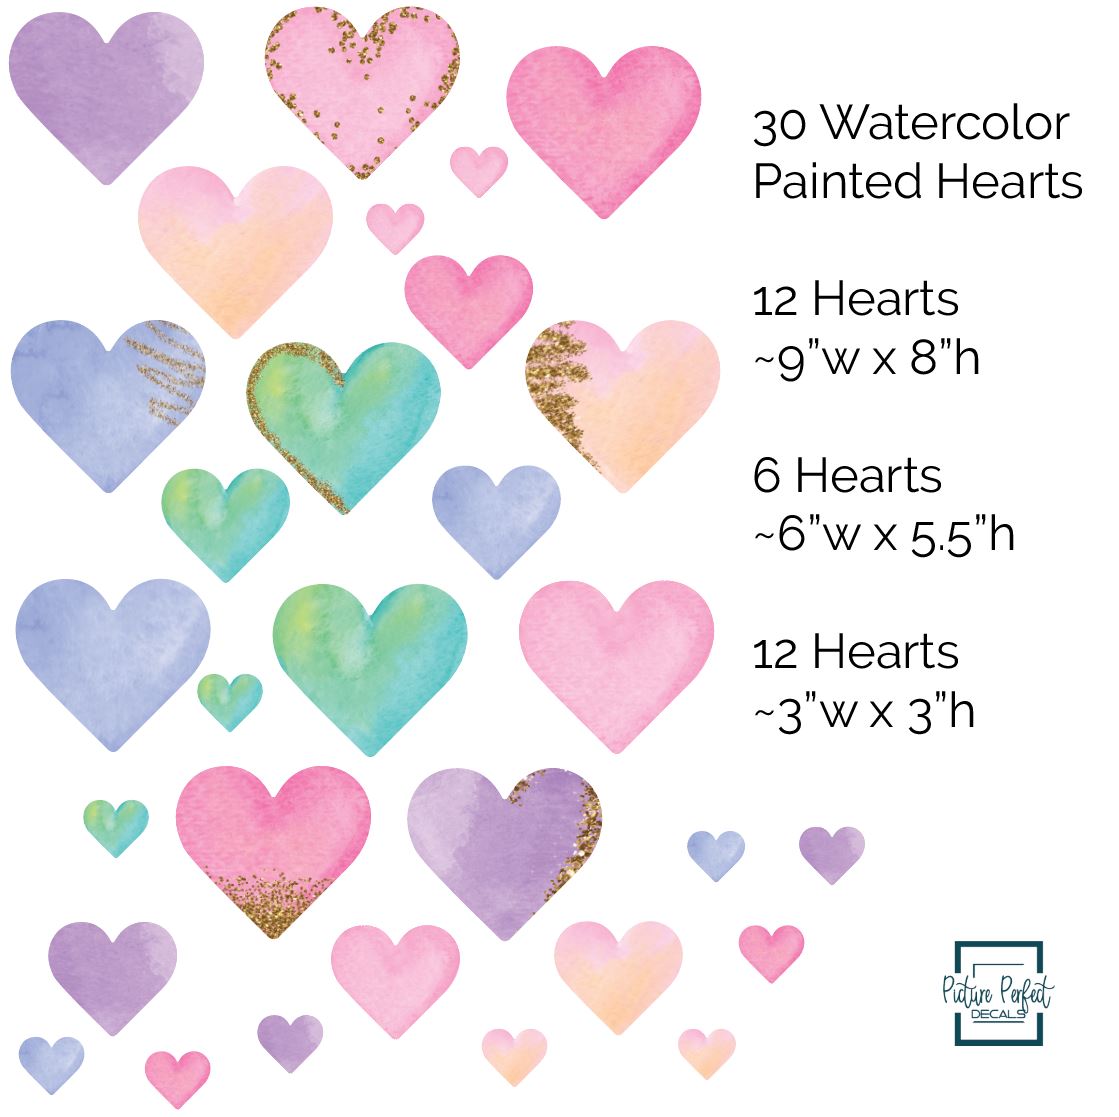 Watercolor Hearts Wall Decals | Rainbow - Picture Perfect Decals